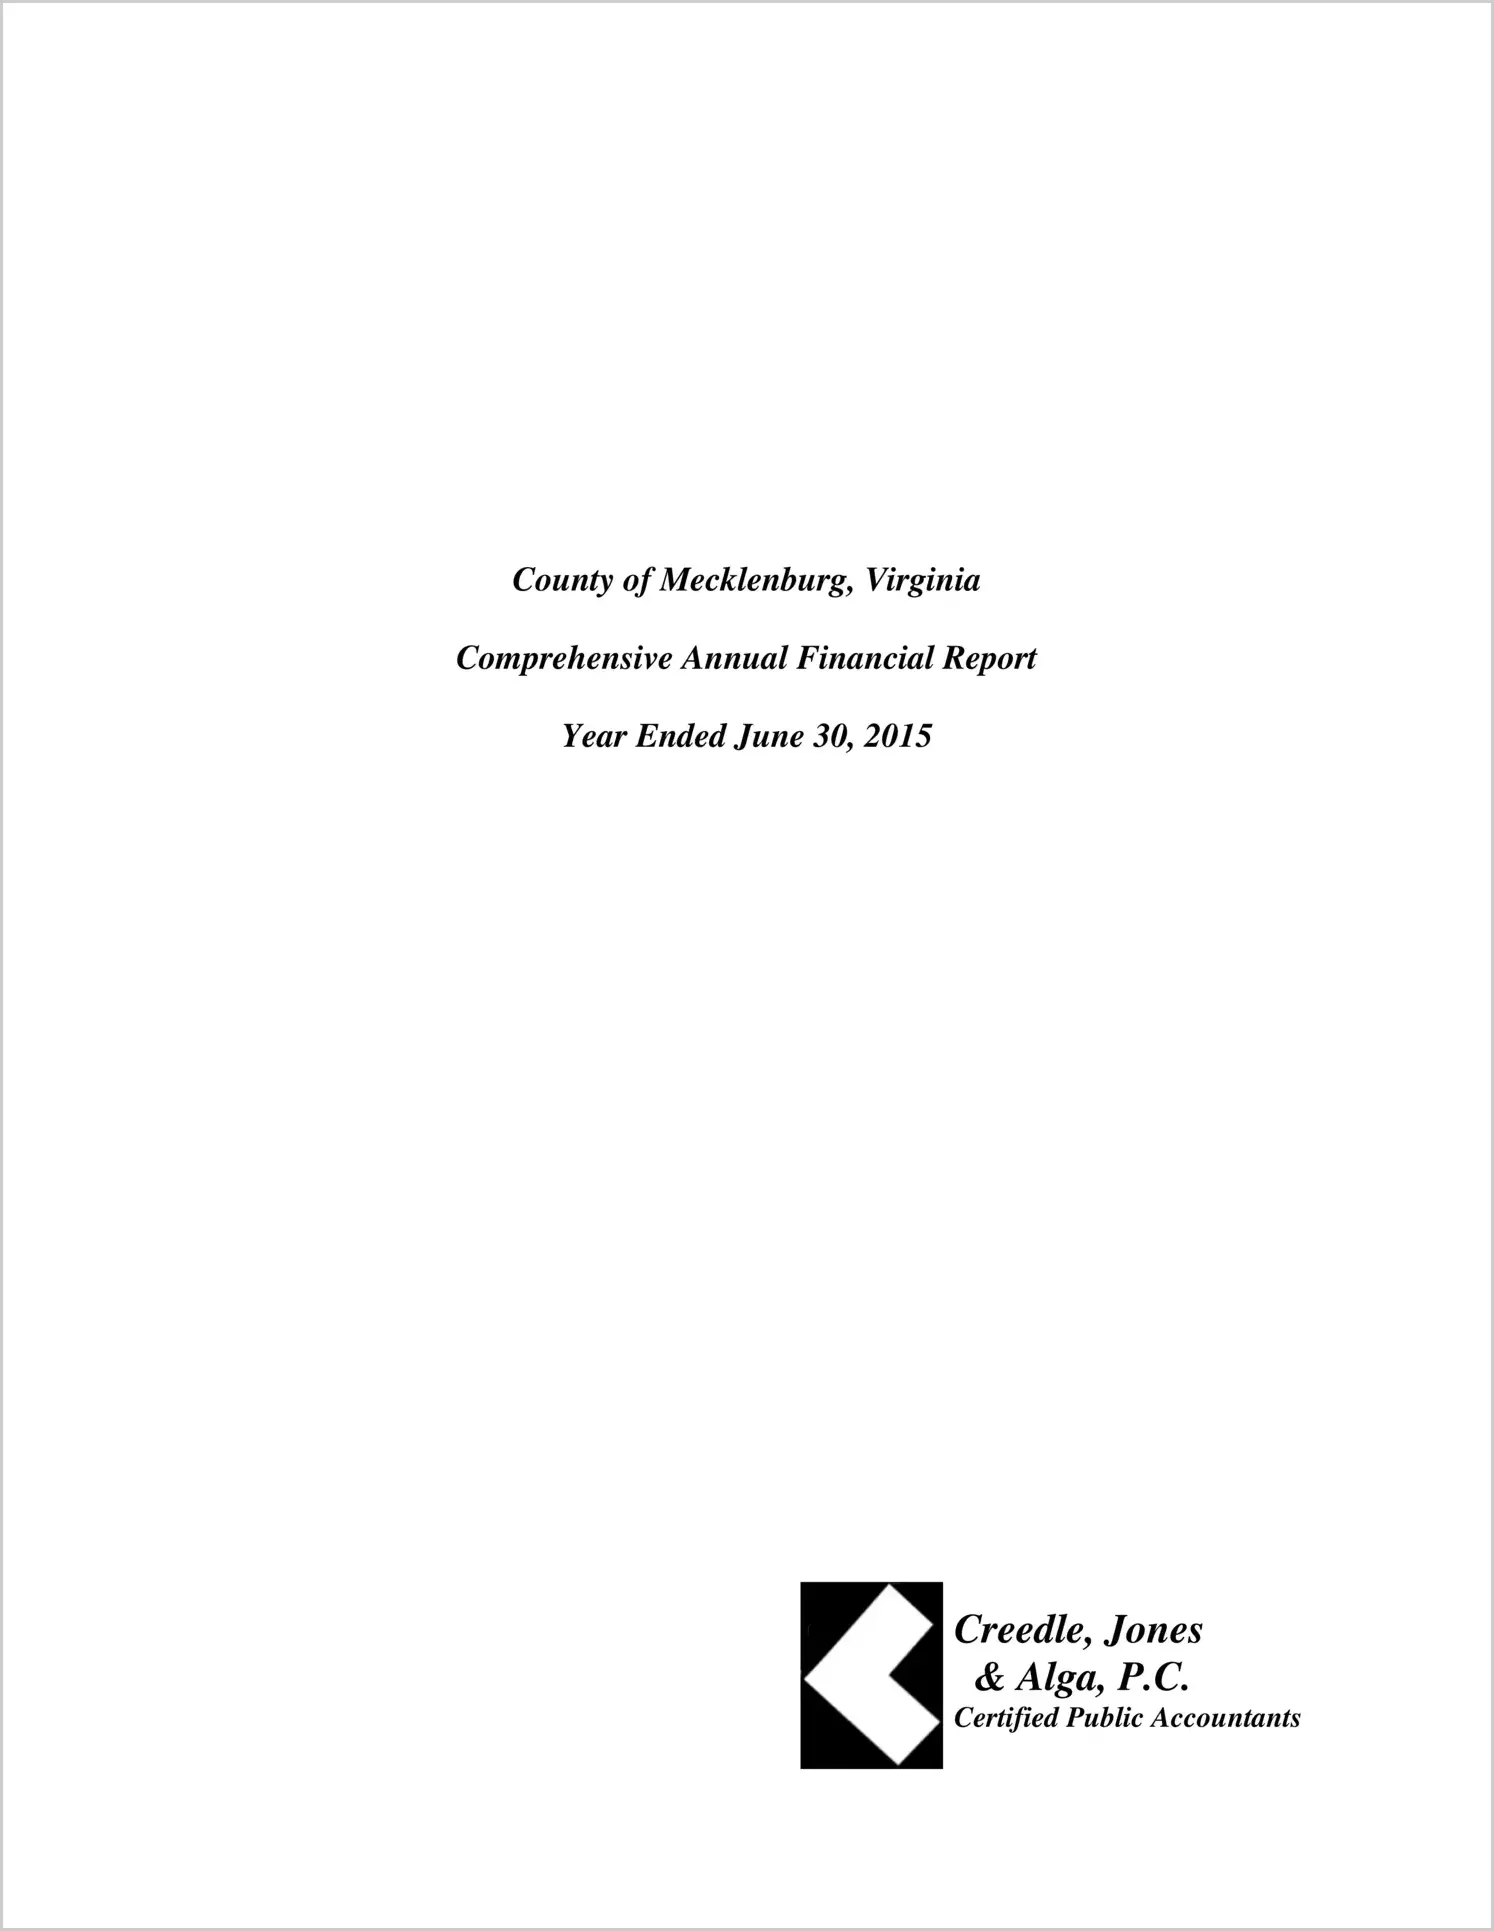 2015 Annual Financial Report for County of Mecklenburg